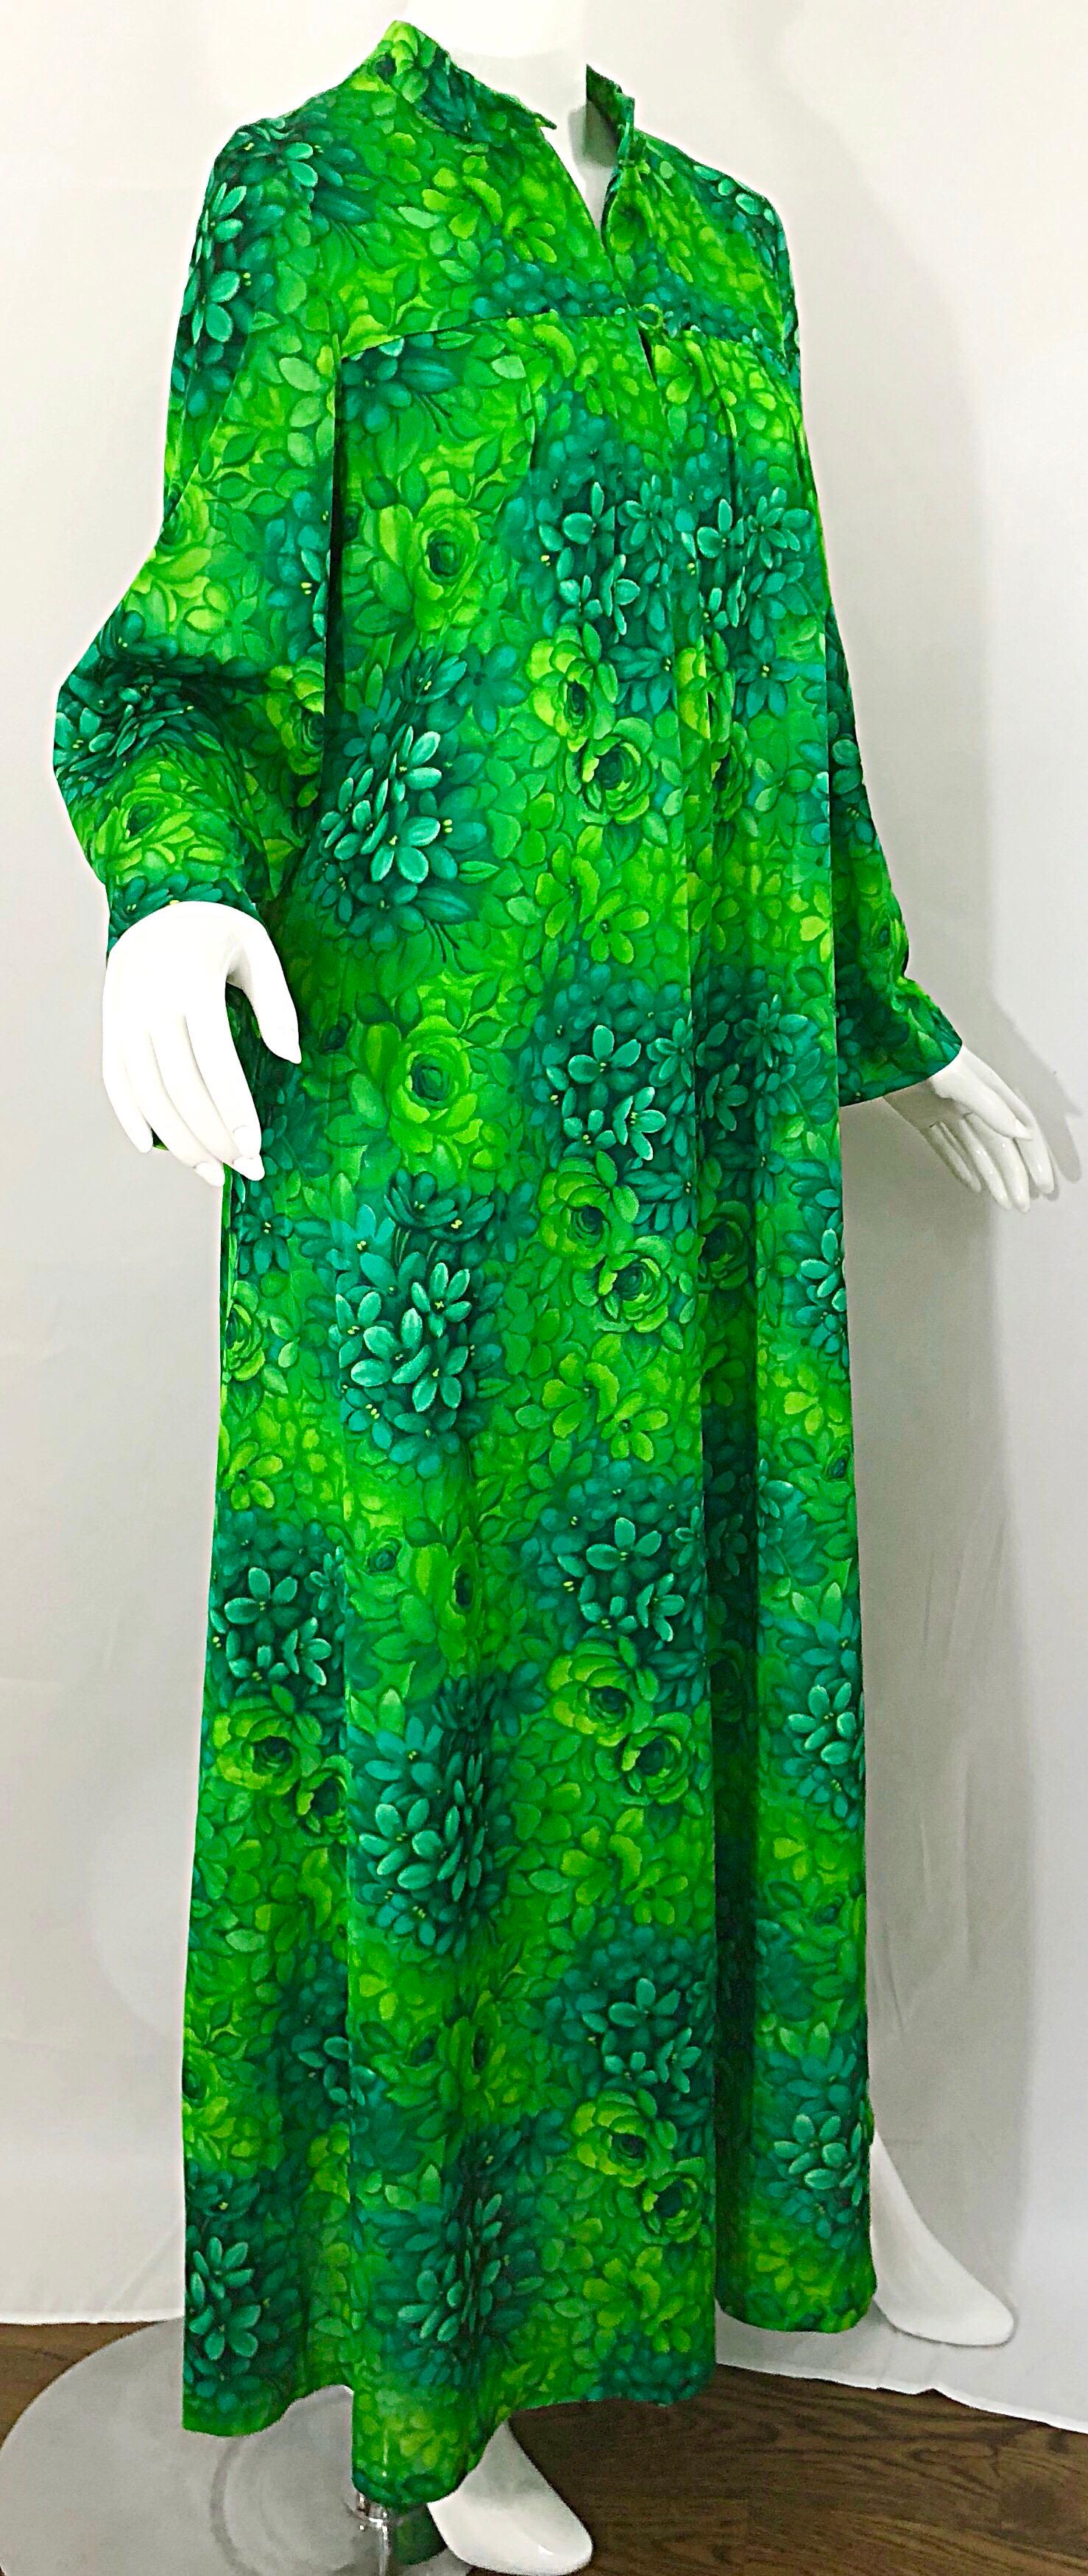 Amazing 1970s Neon + Kelly Green Abstract Flower Print 70s Vintage Caftan Dress 2